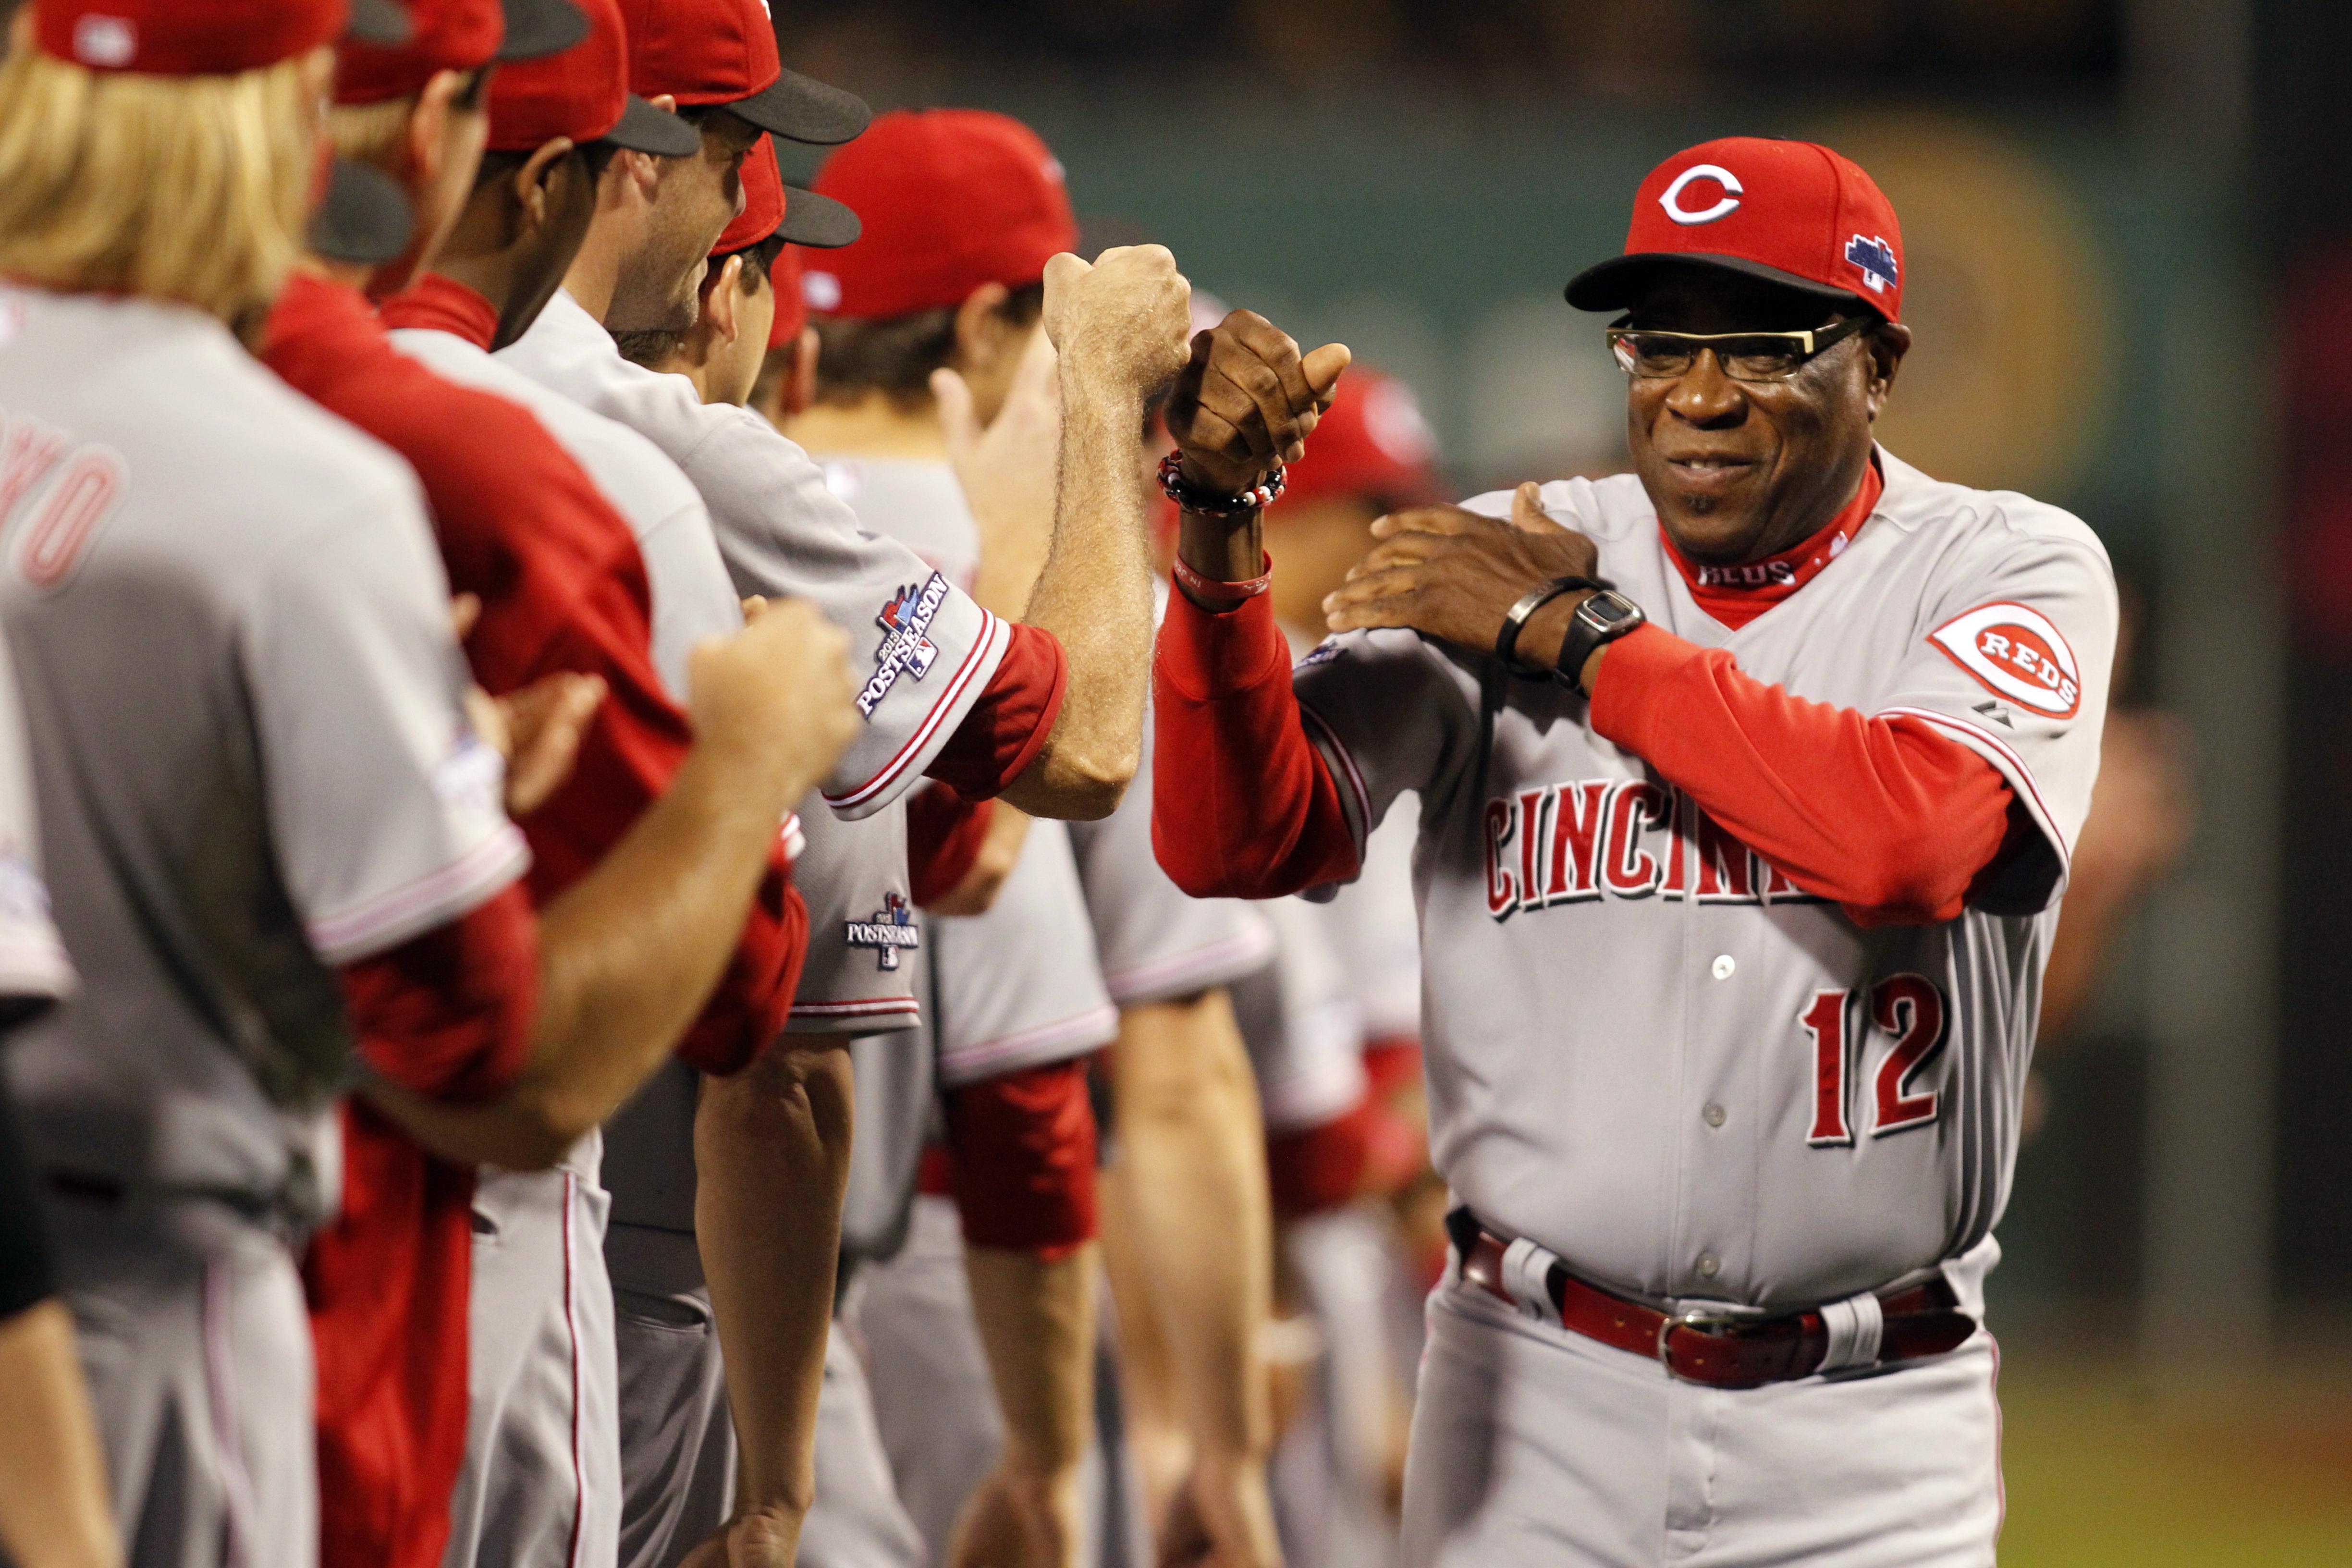 MLB Network Profiles Former Reds Manager Dusty Baker